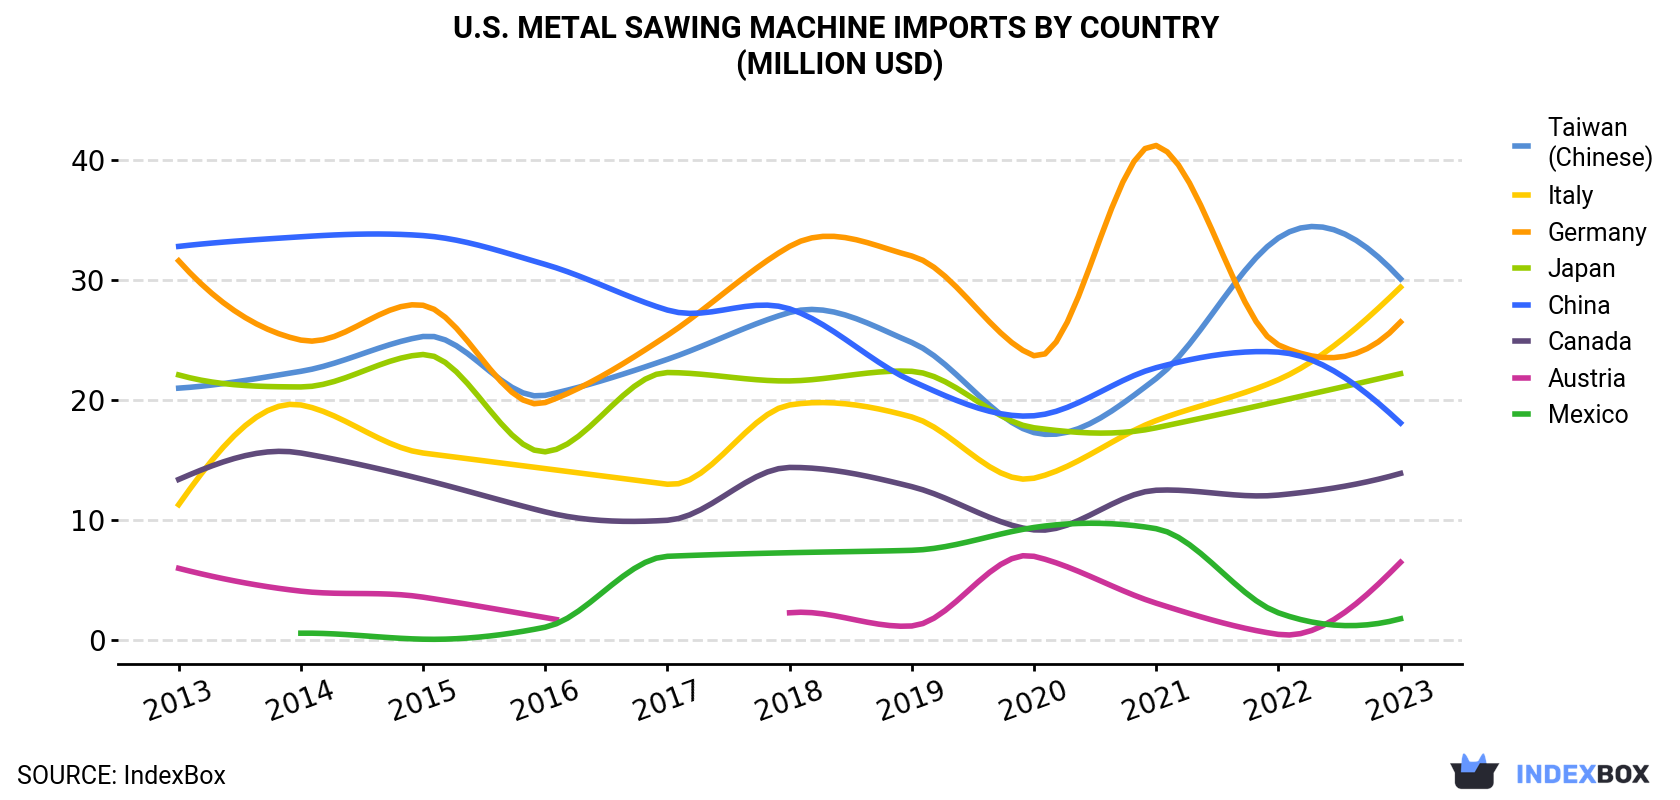 U.S. Metal Sawing Machine Imports By Country (Million USD)